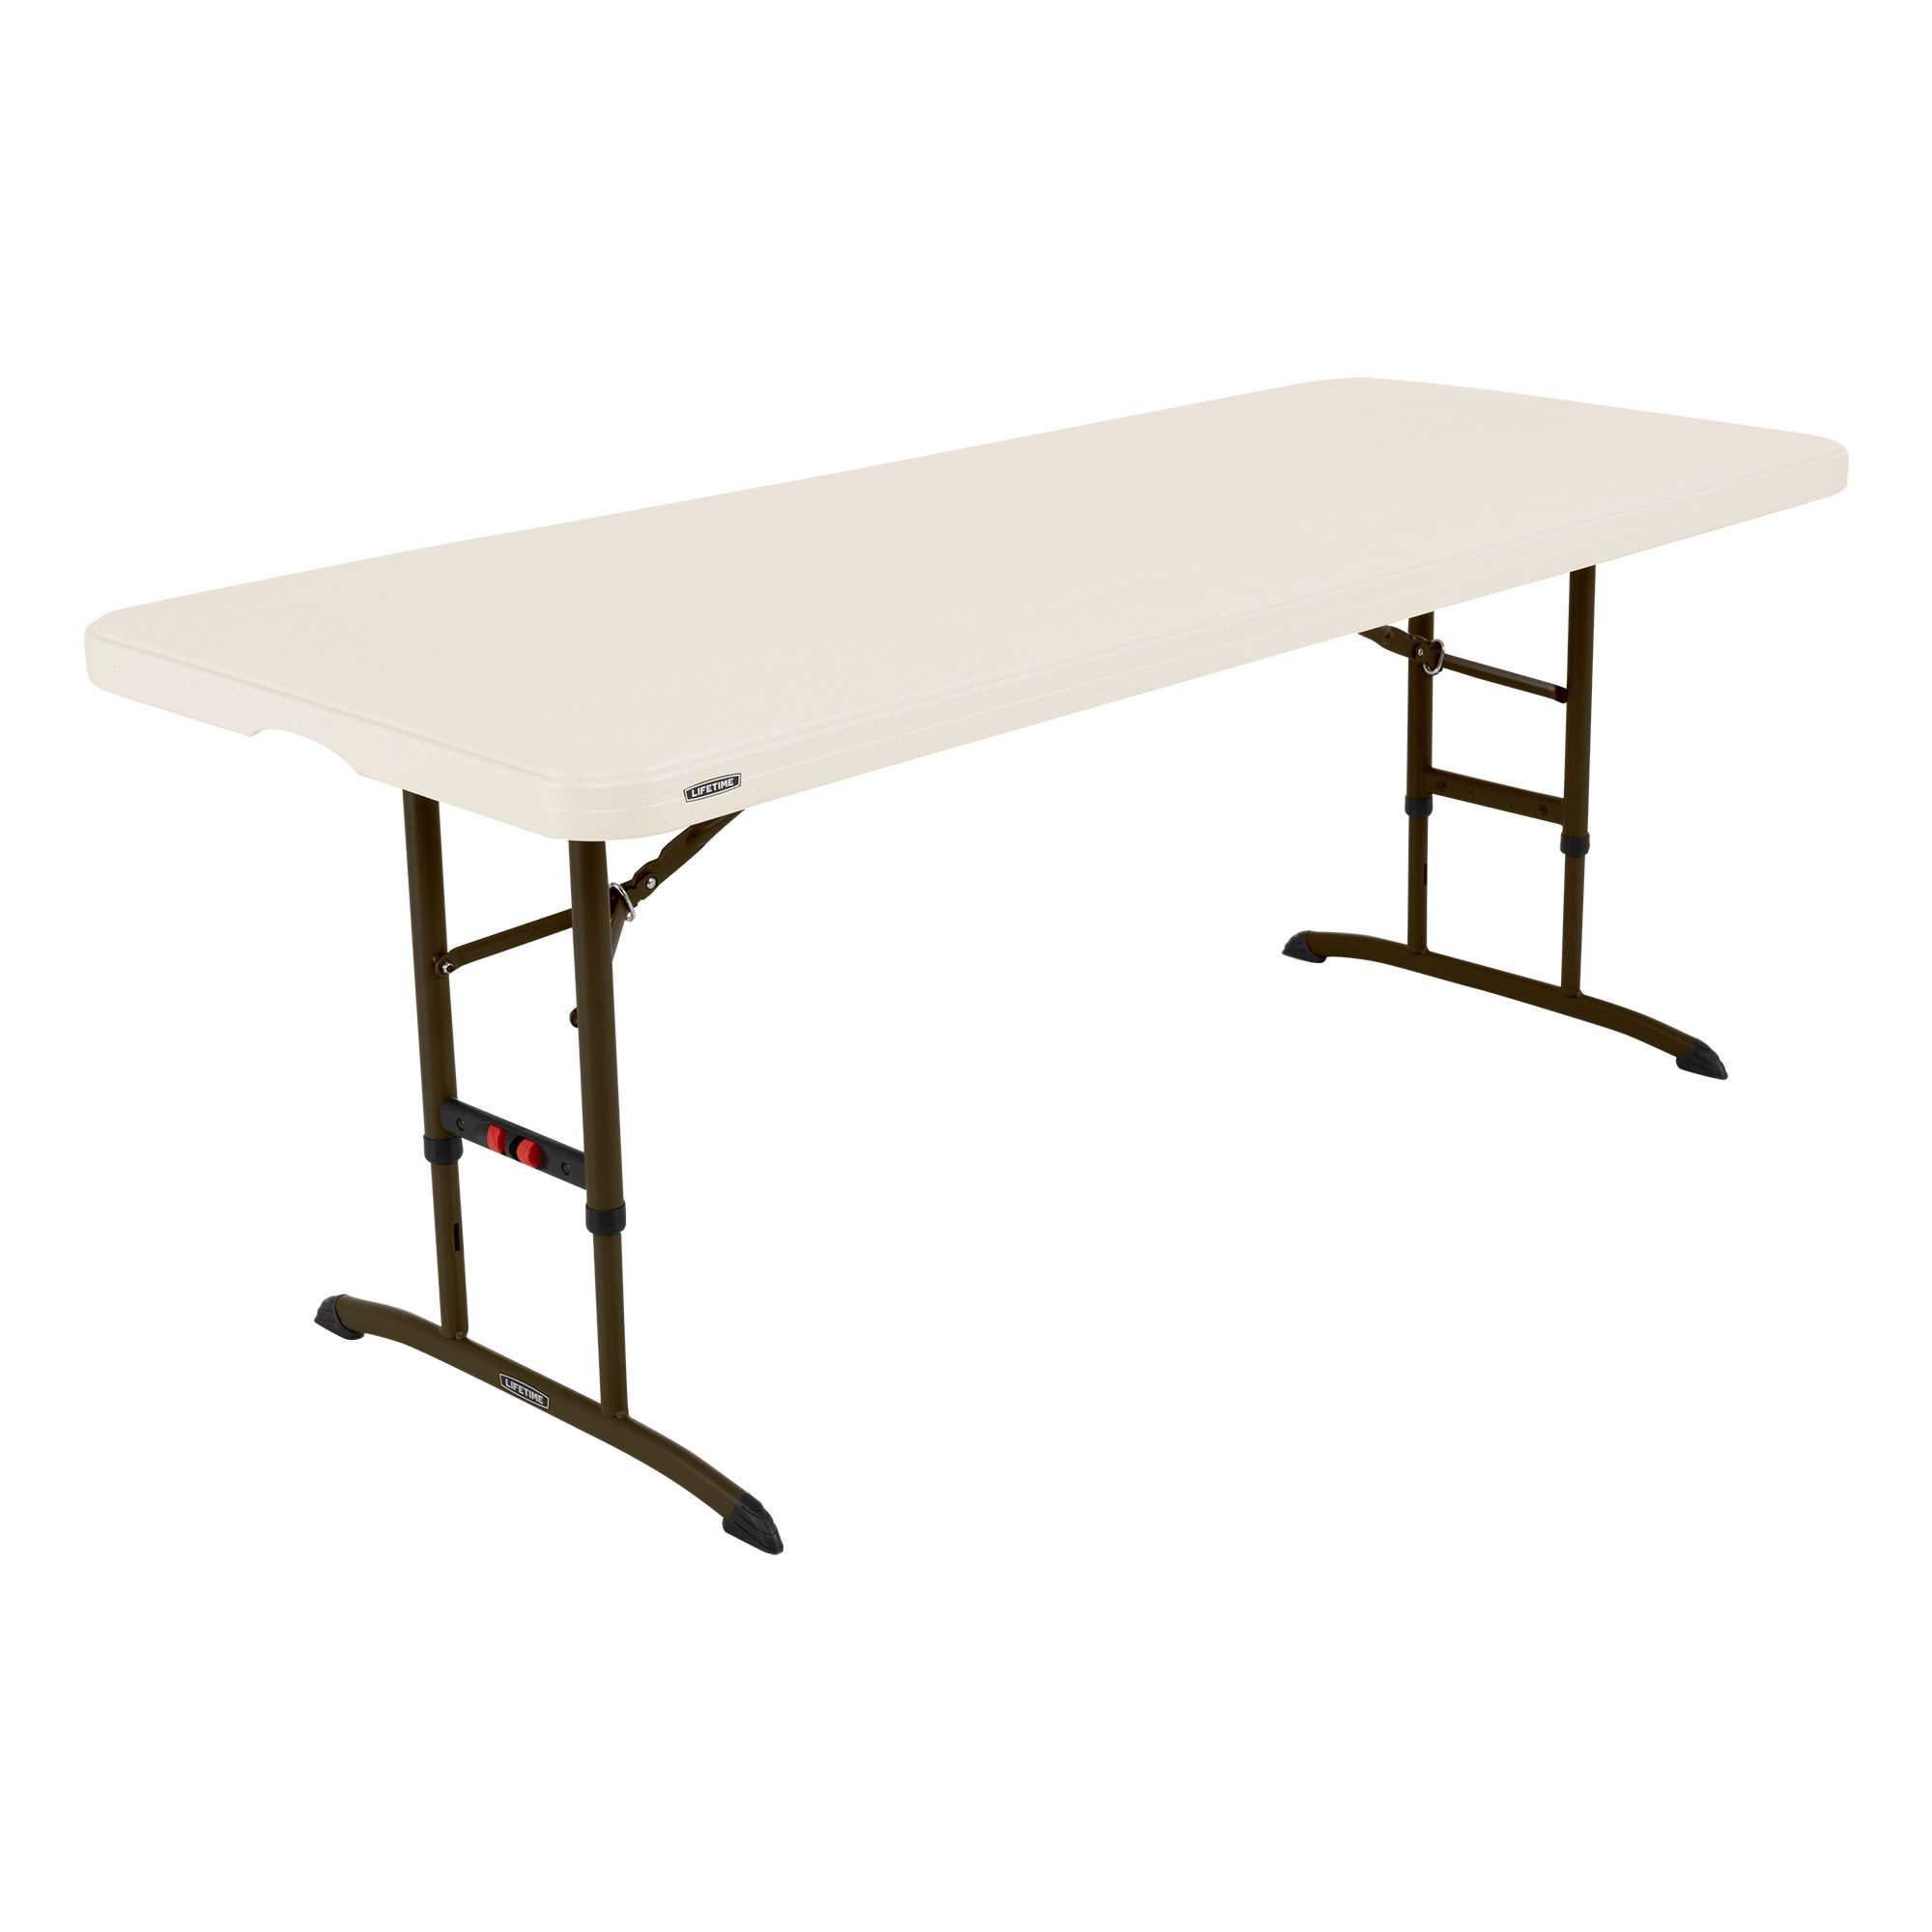 Table rect 183cm 80834